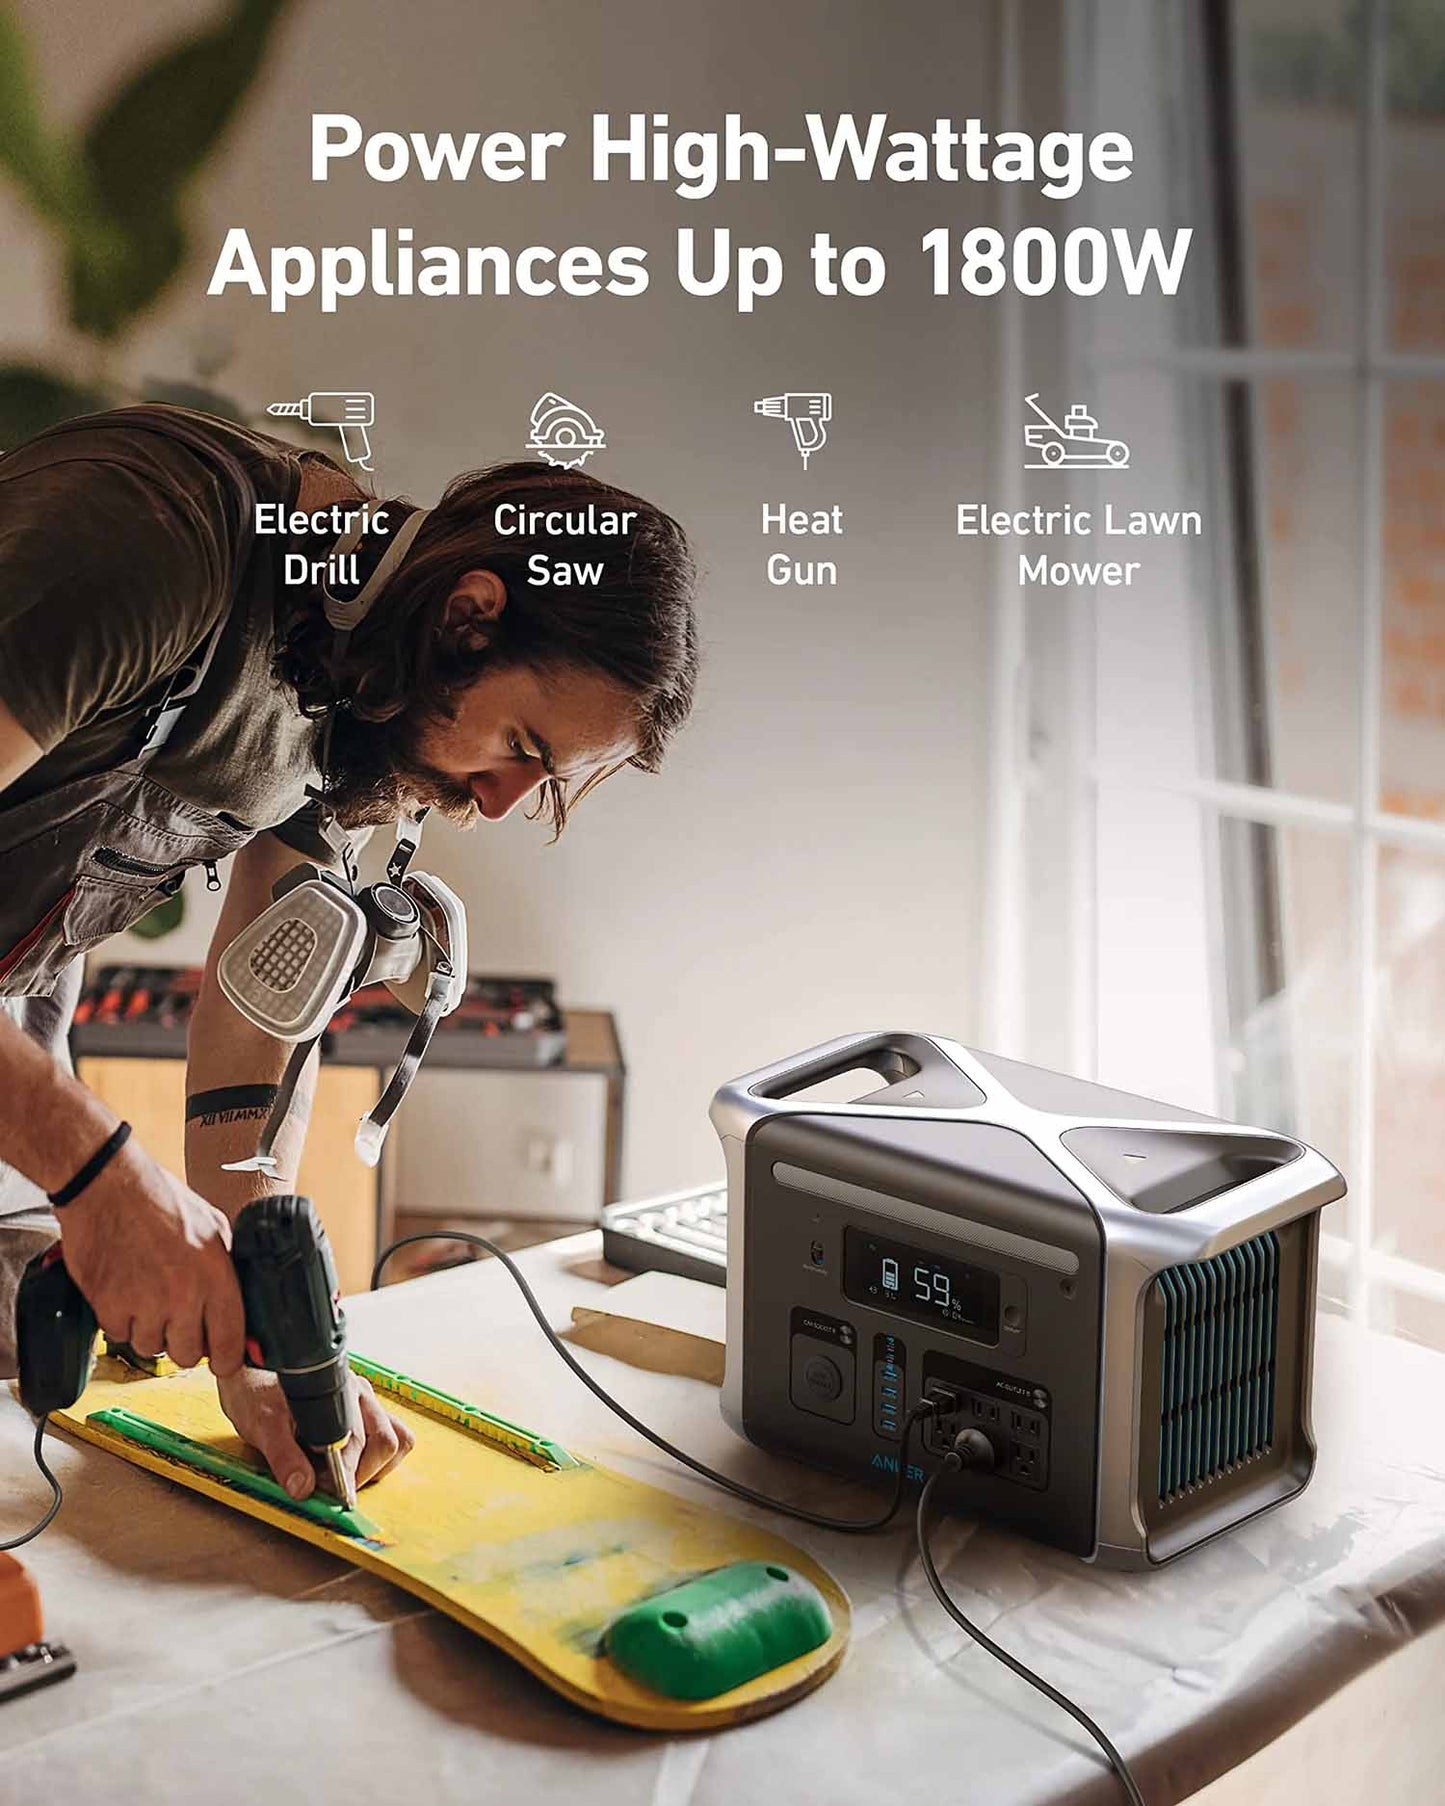 Power High-Wattage Appliances Up To 1800W With The Anker PowerHouse 757